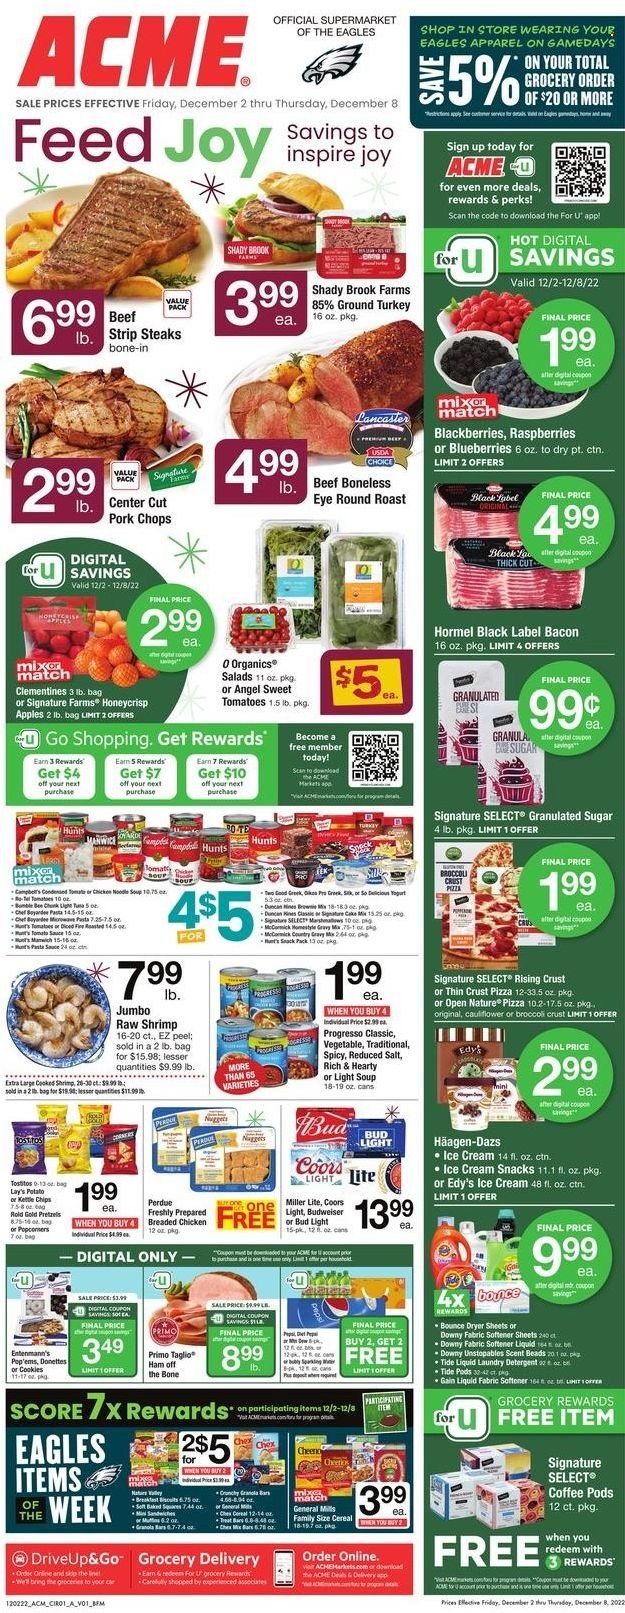 thumbnail - ACME Flyer - 12/02/2022 - 12/08/2022 - Sales products - Entenmann's, cake mix, broccoli, apples, blackberries, blueberries, shrimps, Campbell's, pizza, pasta sauce, soup, nuggets, sauce, fried chicken, noodles cup, noodles, Progresso, Perdue®, Hormel, bacon, ham, ham off the bone, yoghurt, ice cream, Häagen-Dazs, cookies, marshmallows, biscuit, chips, Lay’s, kettle, Chex Mix, granulated sugar, sugar, salt, tomato sauce, cereals, granola bar, Pepsi, coffee pods, beer, Bud Light, ground turkey, beef meat, steak, round roast, striploin steak, pork chops, pork meat, detergent, Gain, Tide, Unstopables, fabric softener, laundry detergent, Bounce, dryer sheets, Downy Laundry, Joy, cap, Budweiser, clementines, Miller Lite, Coors. Page 1.